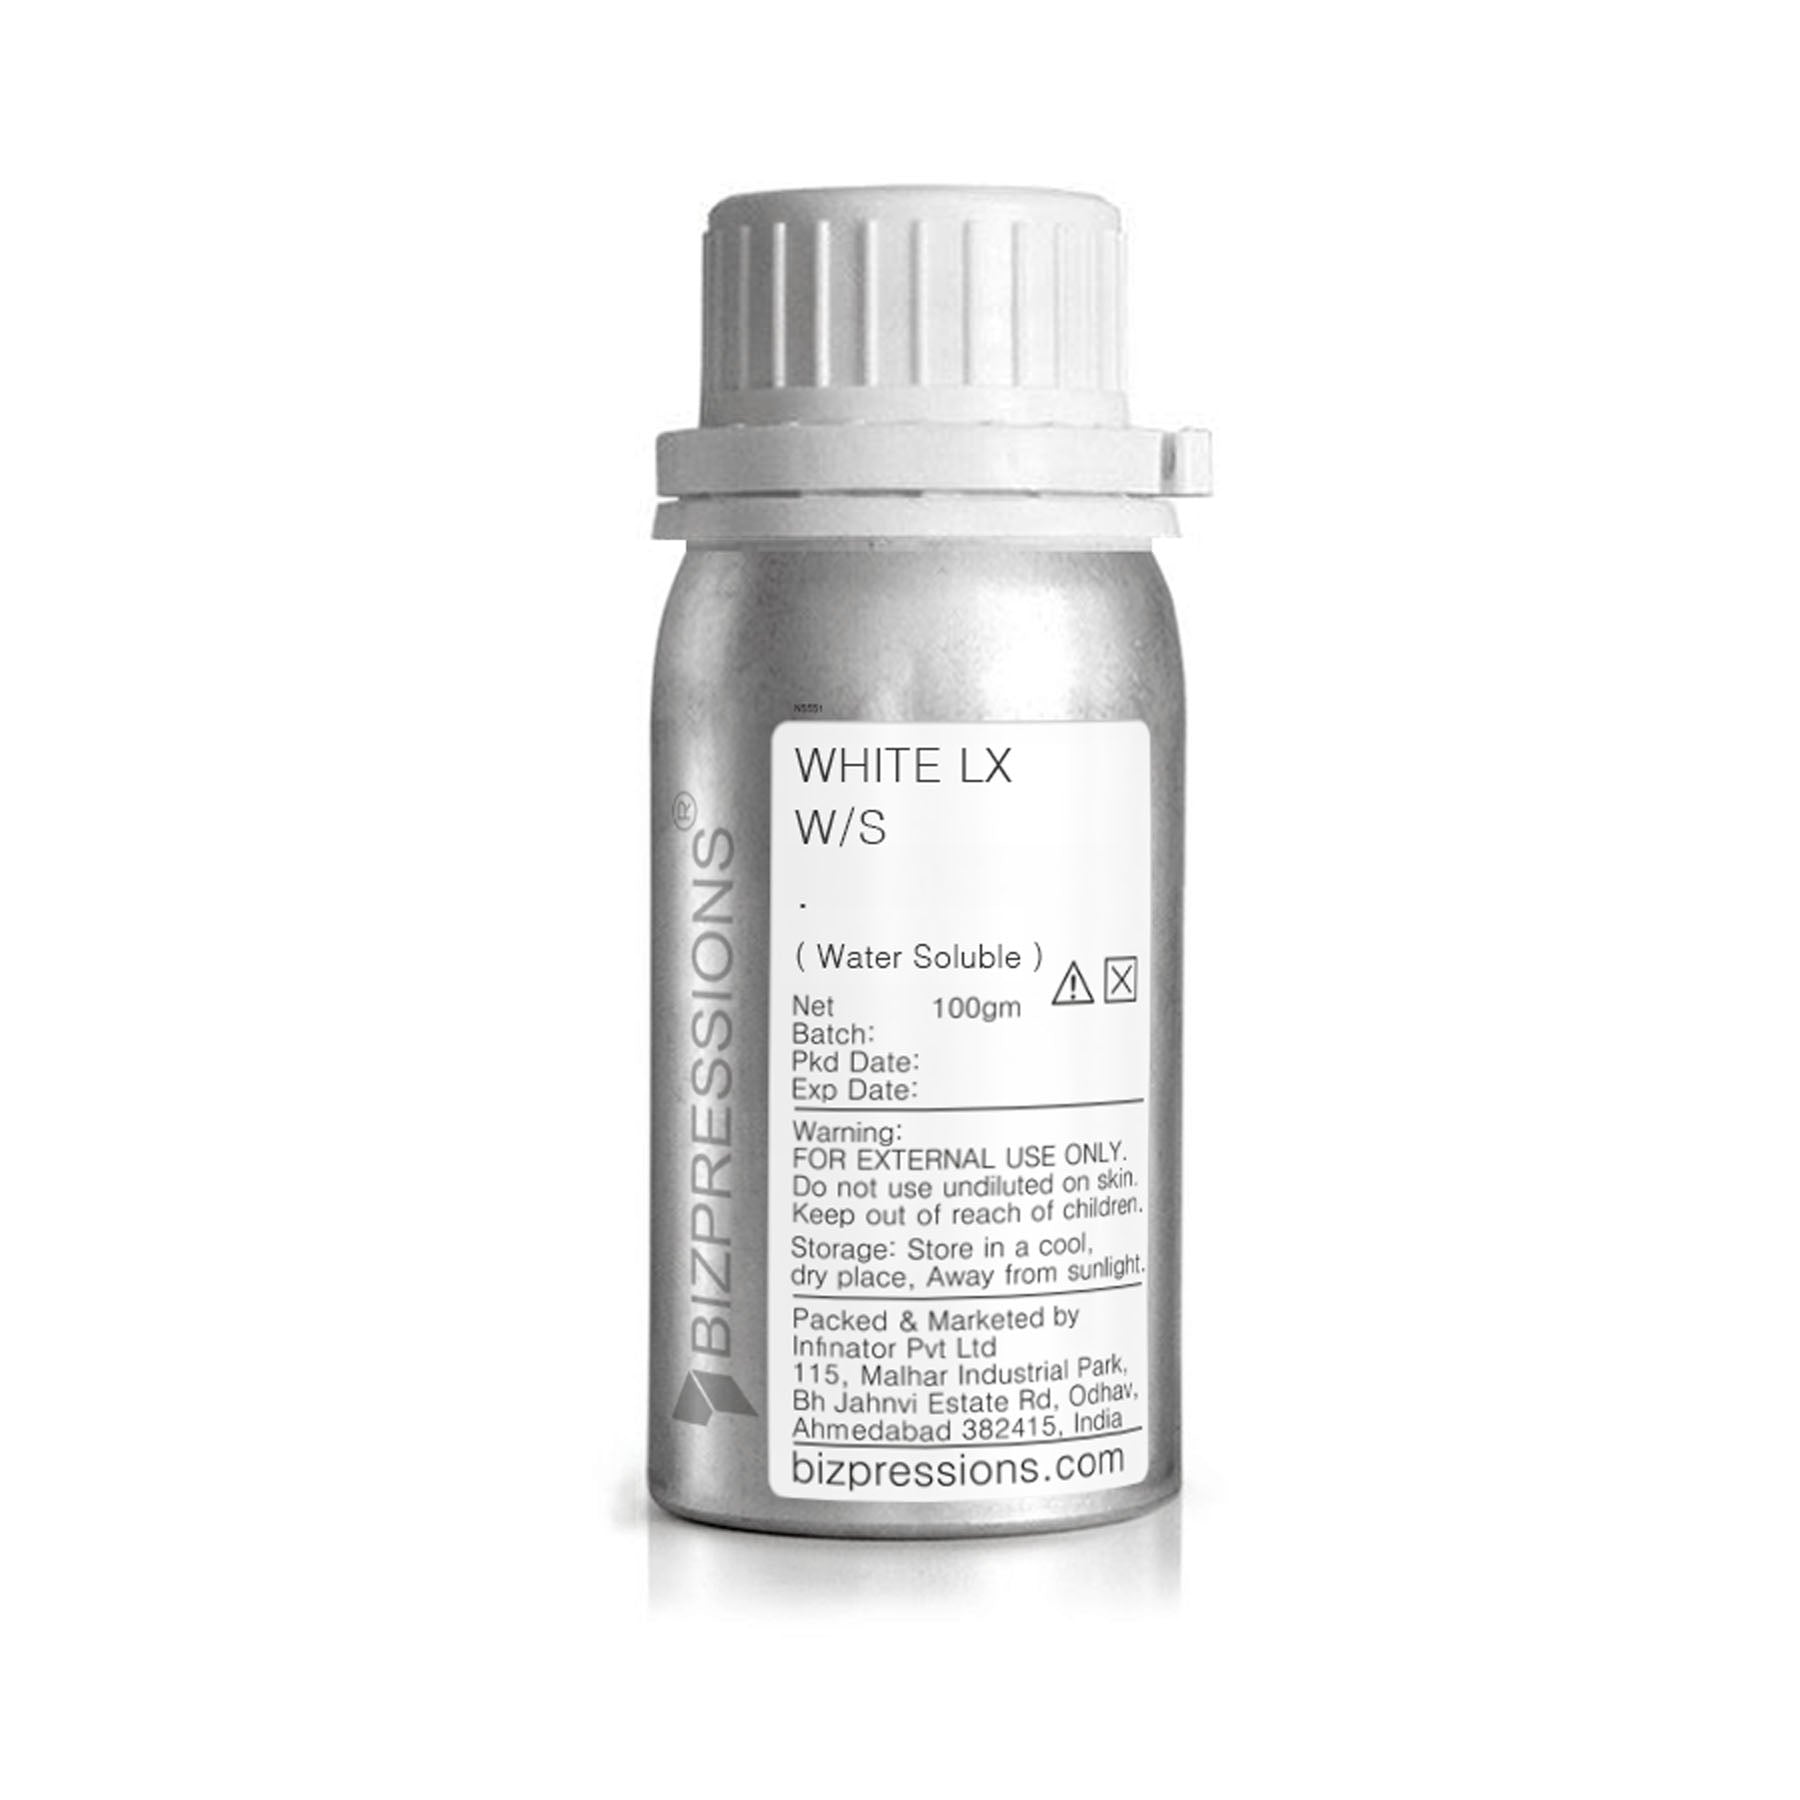 WHITE LX W/S - Fragrance ( Water Soluble ) - 100 gm